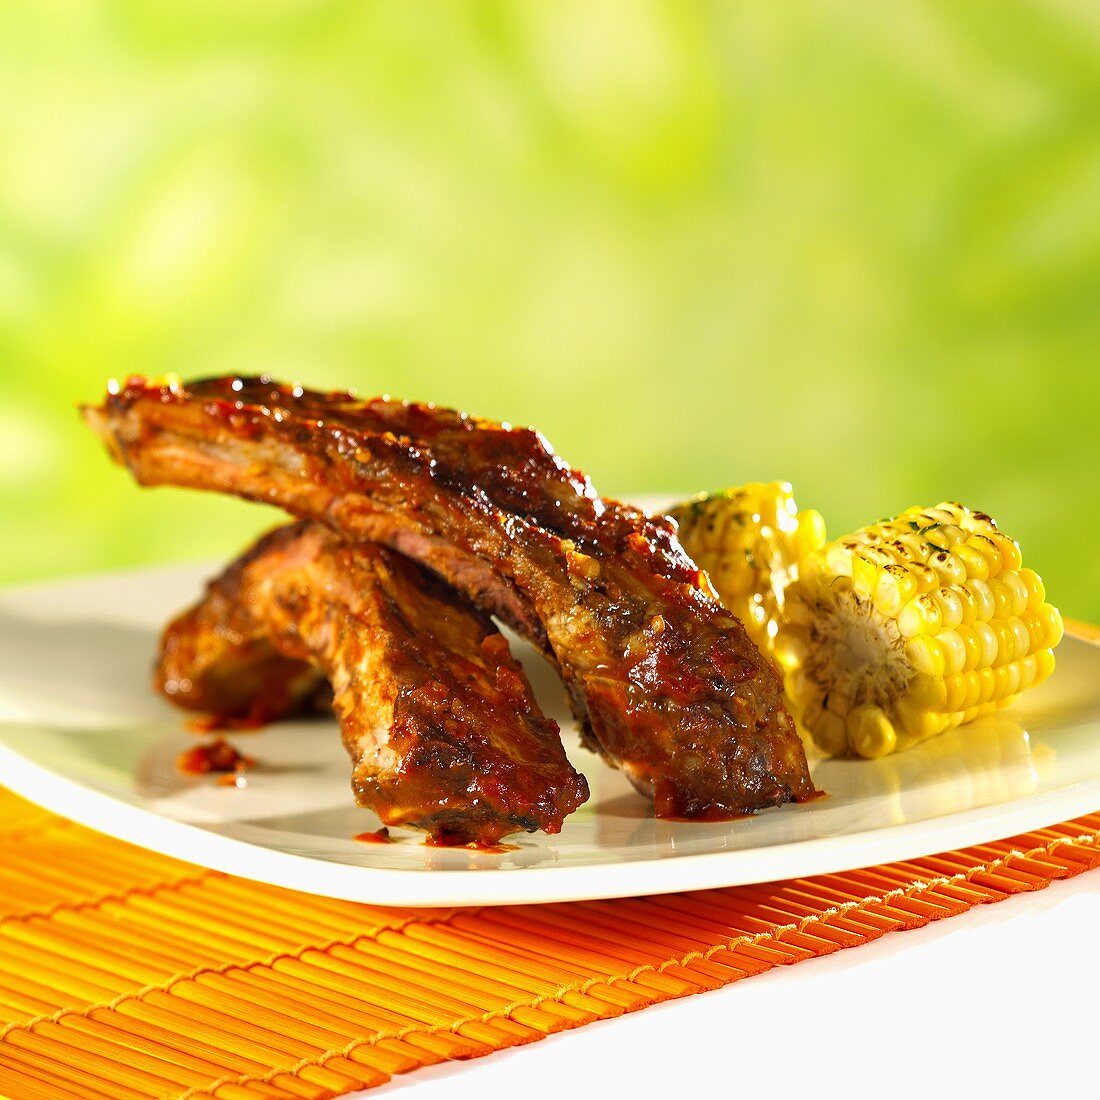 Barbecued beef ribs with corncobs